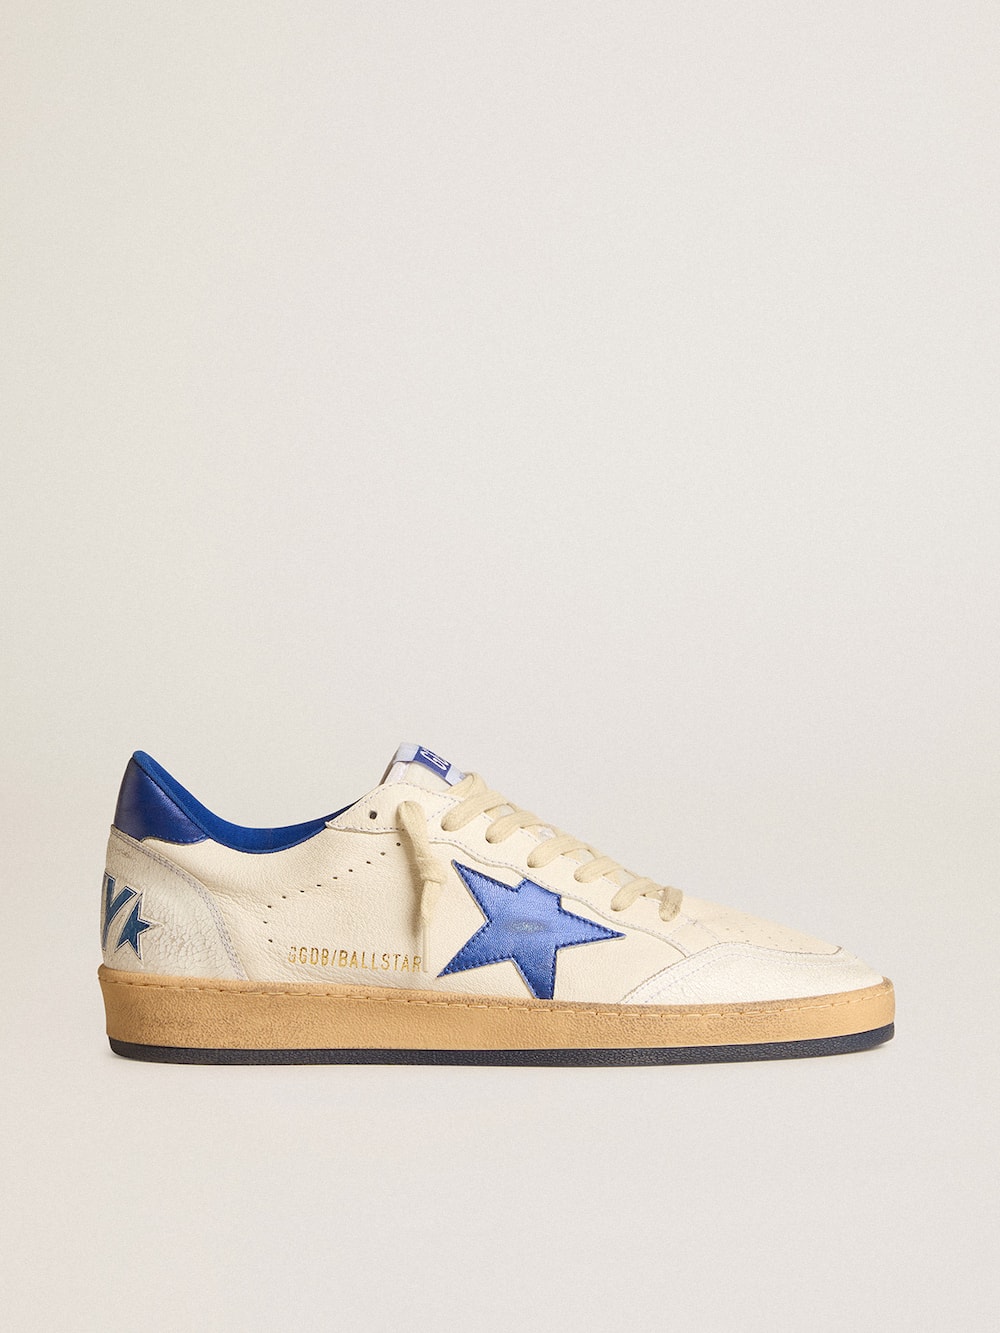 Golden Goose - Women’s Ball Star Wishes in white nappa leather with bright blue star and heel tab in 